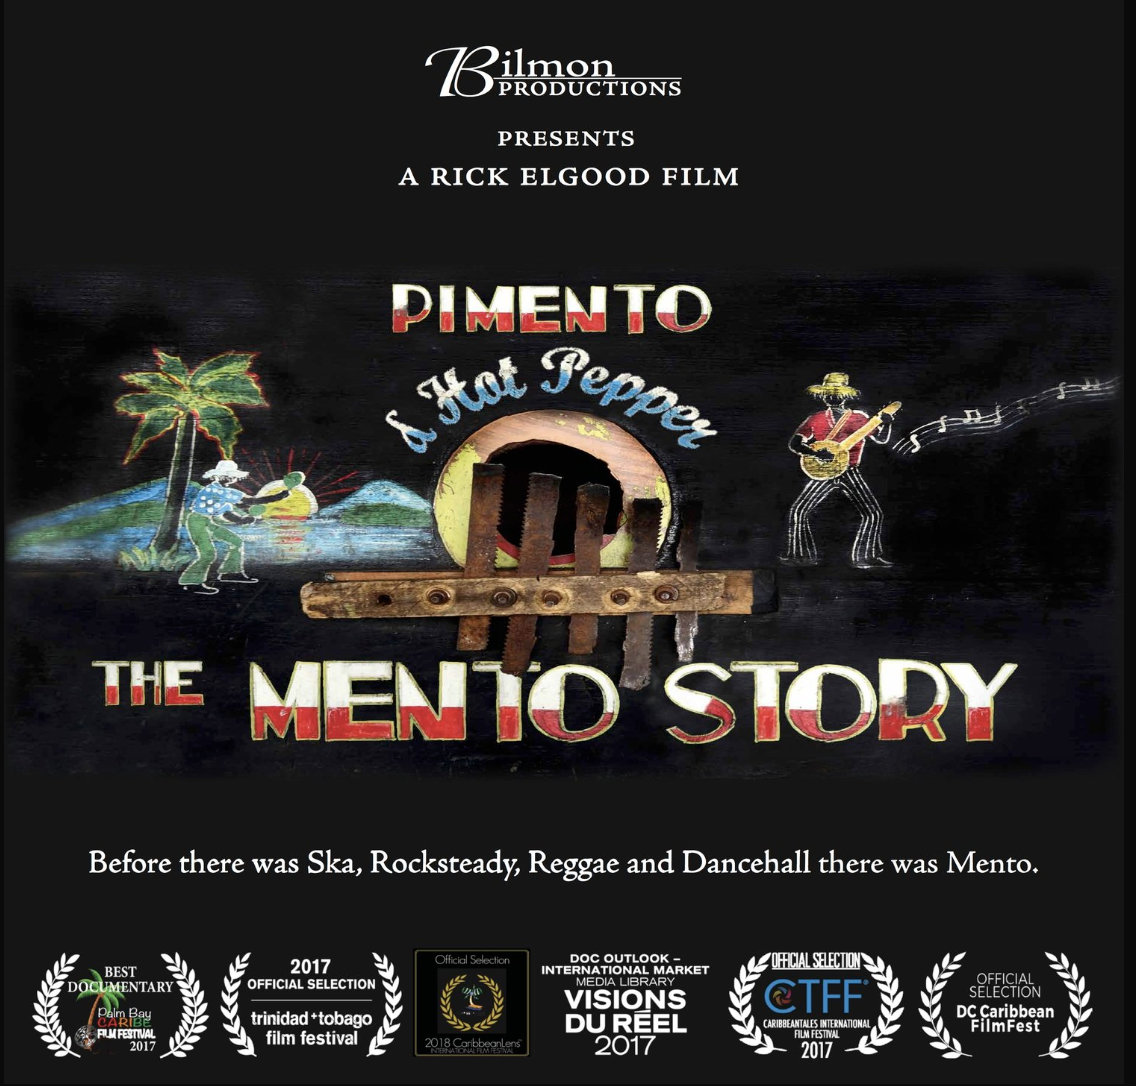 The Mento Story